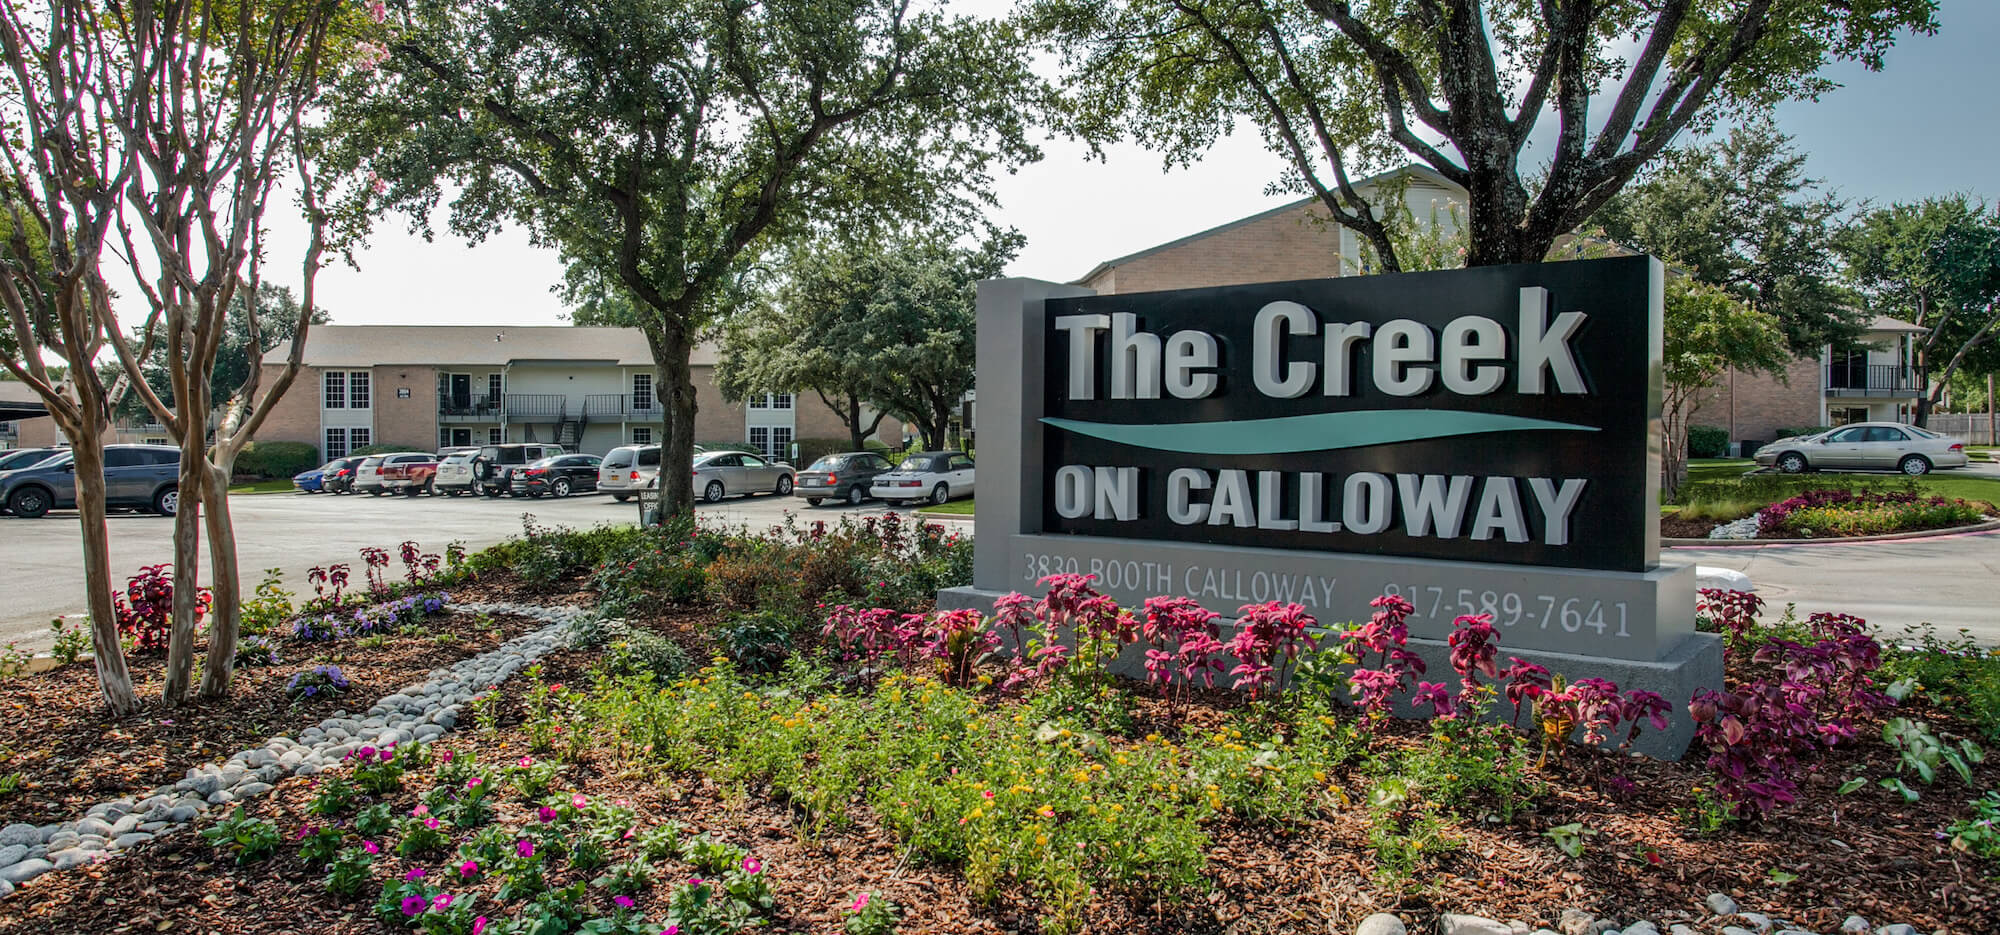 The Creek on Calloway signage